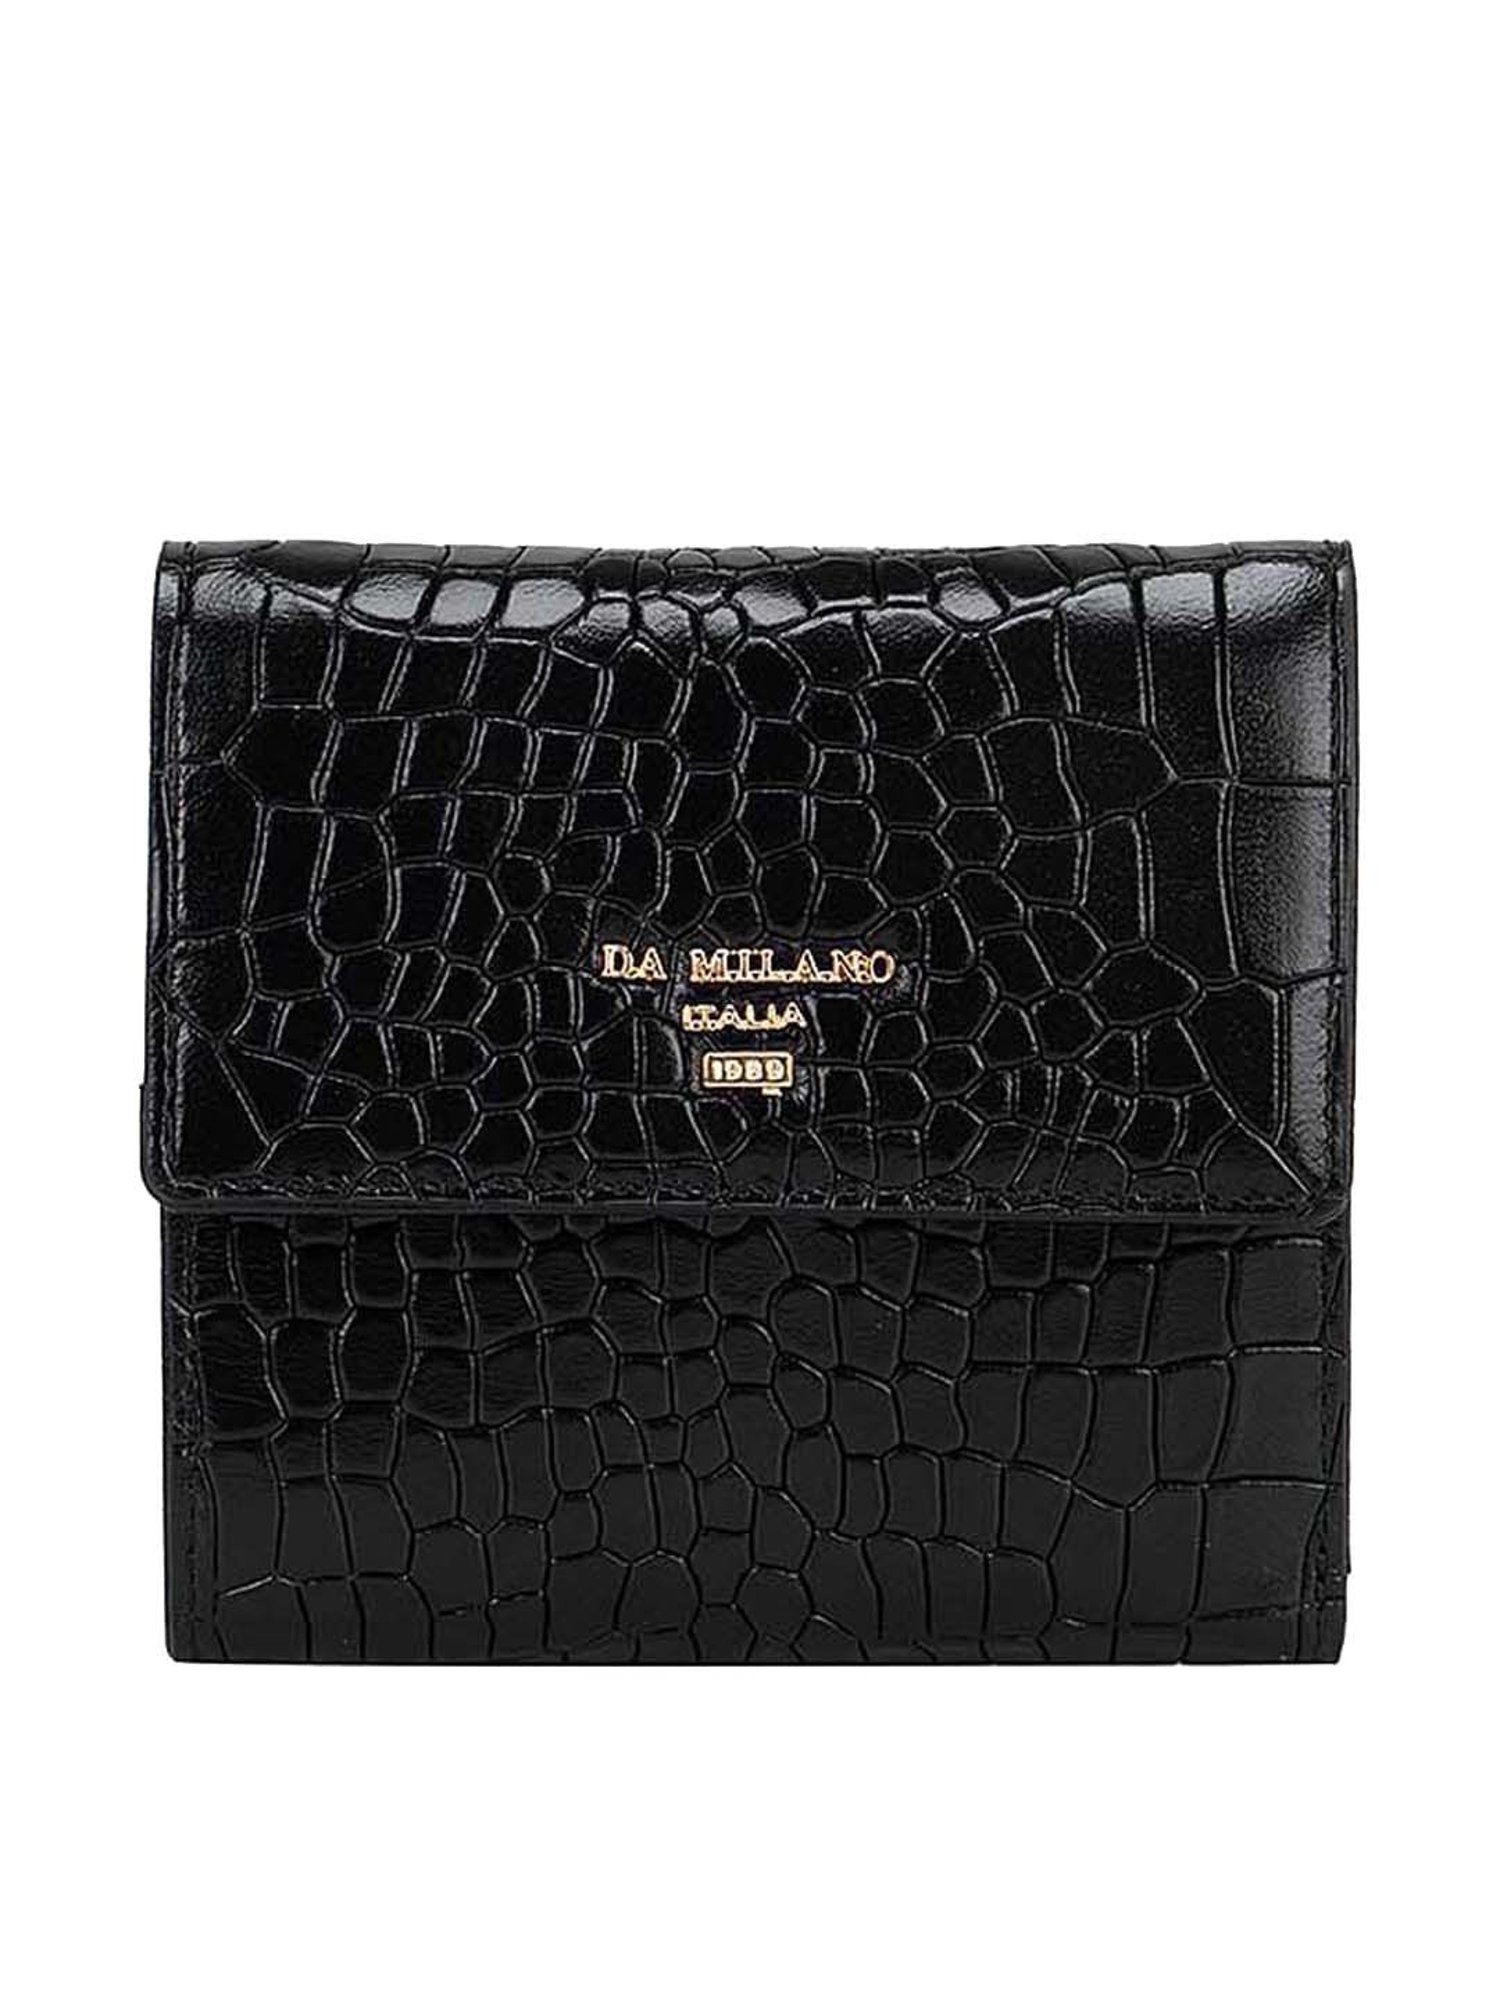 Buy Da Milano Black Leather Tri-Fold Wallet with Key Chain Online